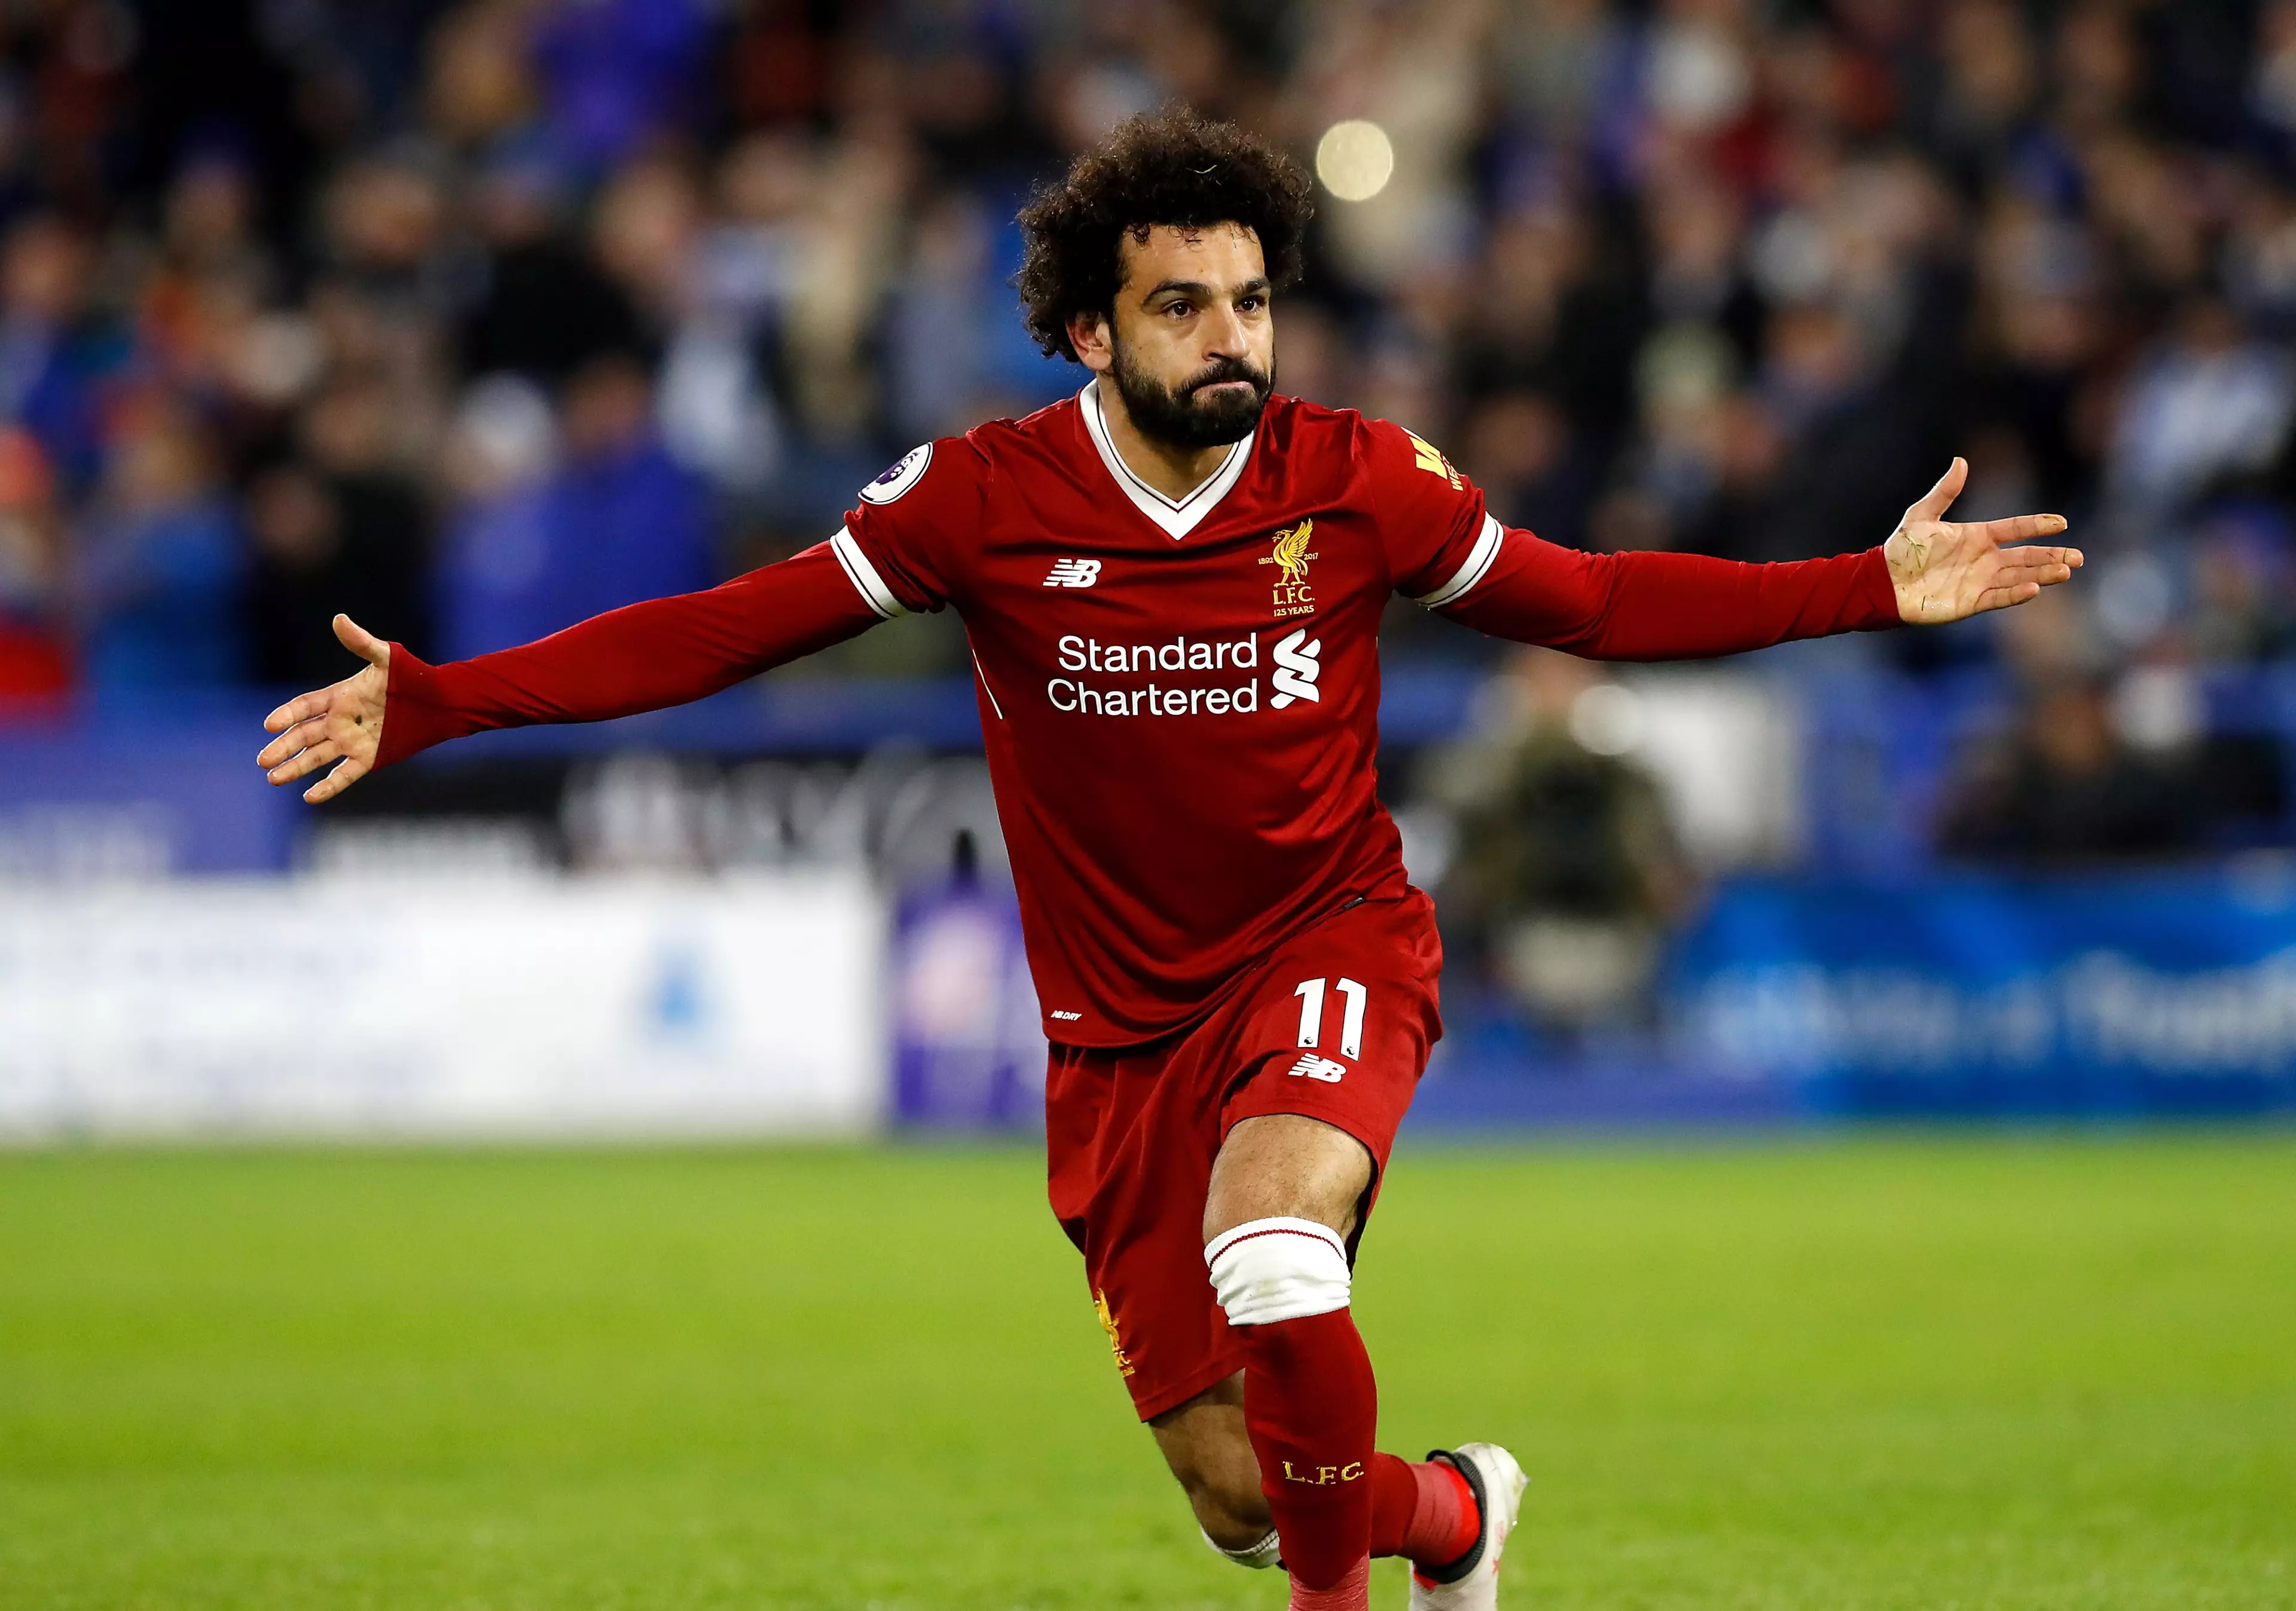 Salah's been flying for Liverpool this season. Image: PA Images